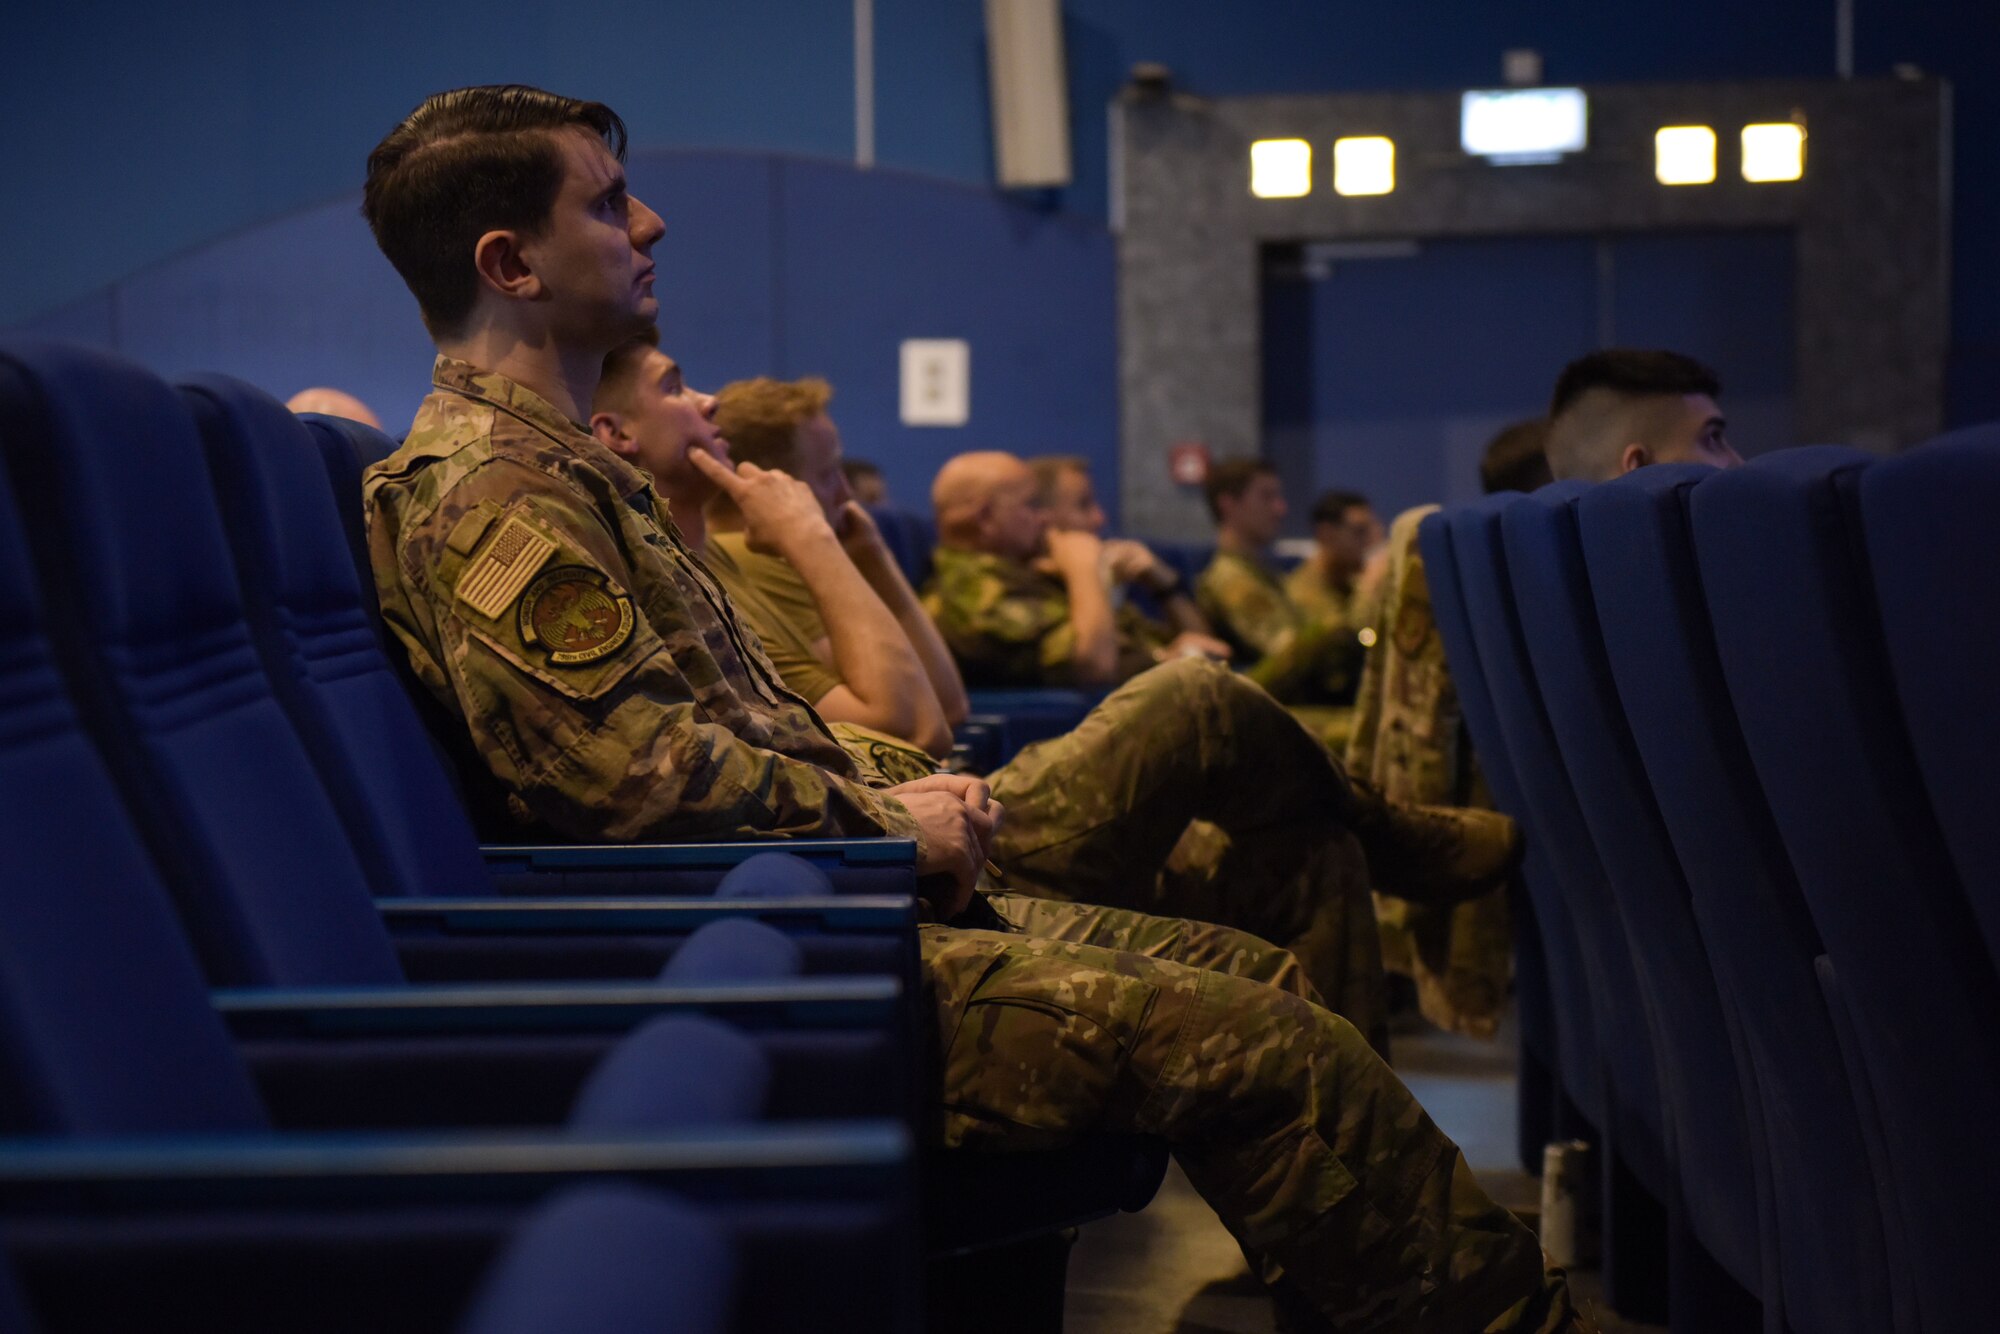 Airmen sit in chairs and watch a speaker